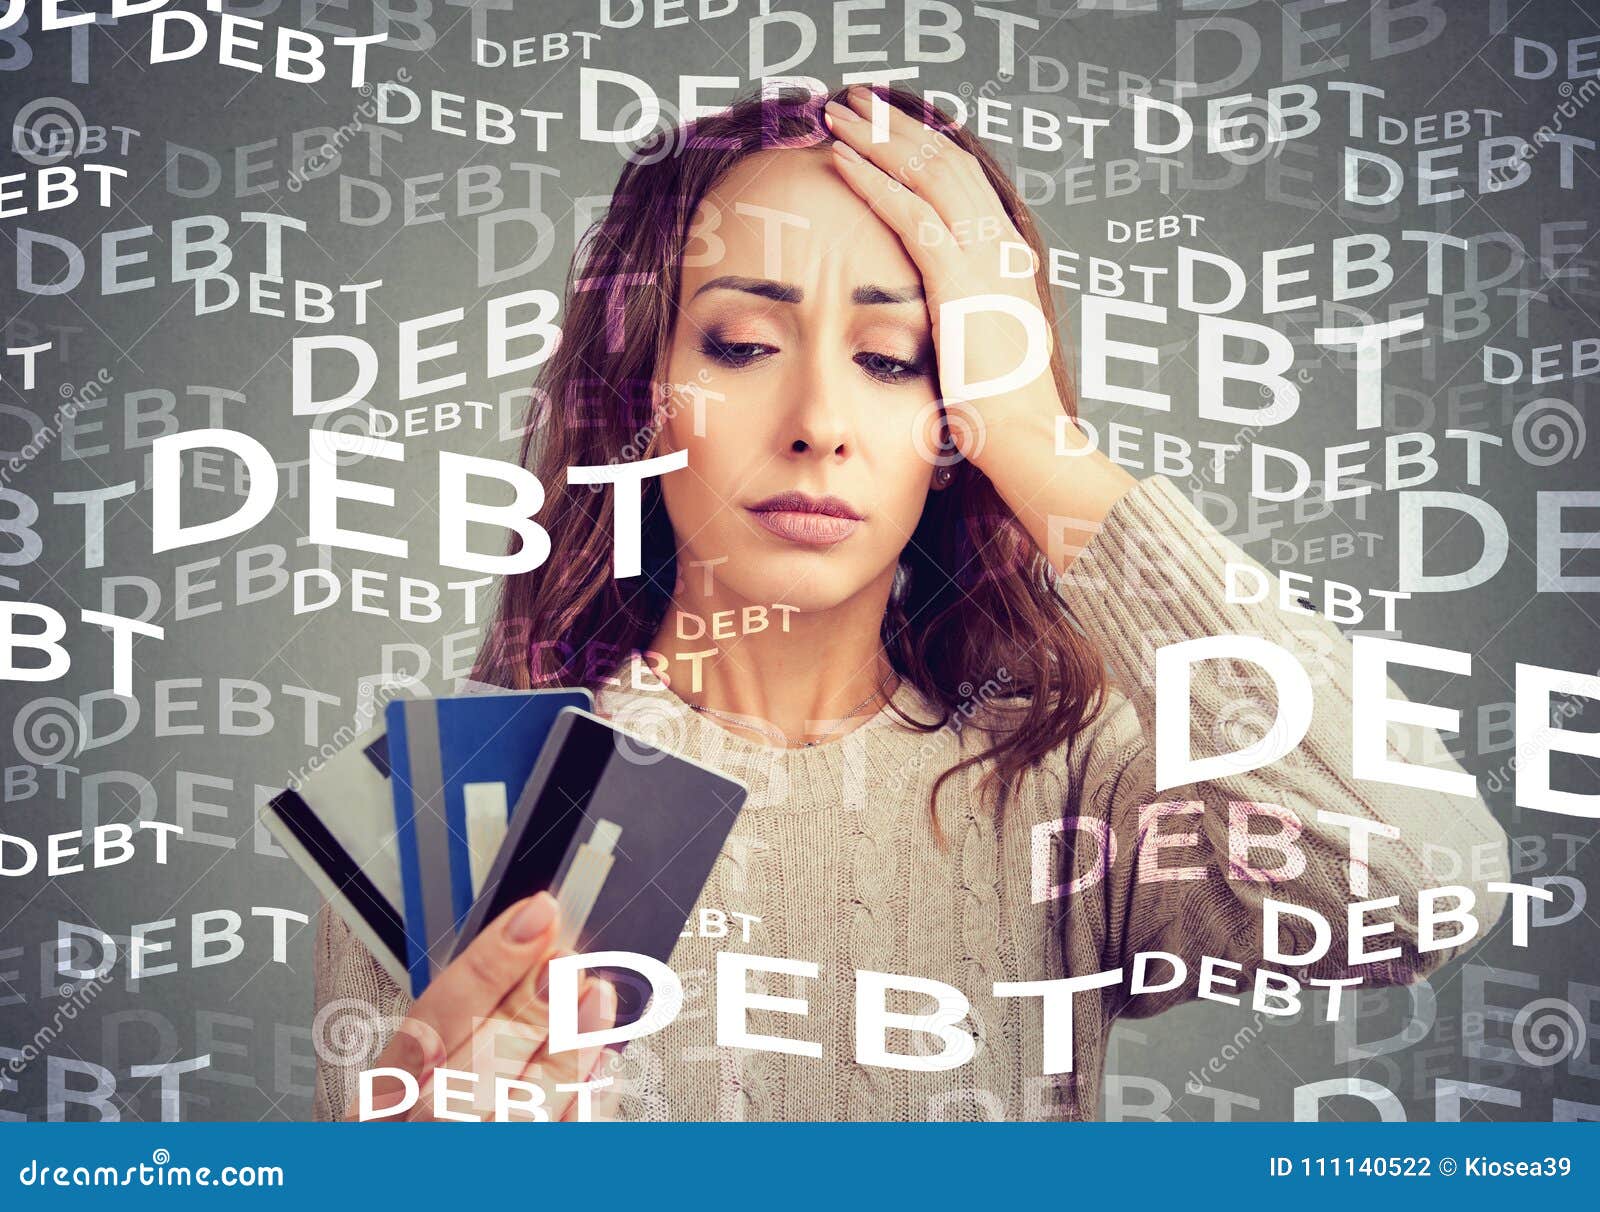 young woman with credit card debt